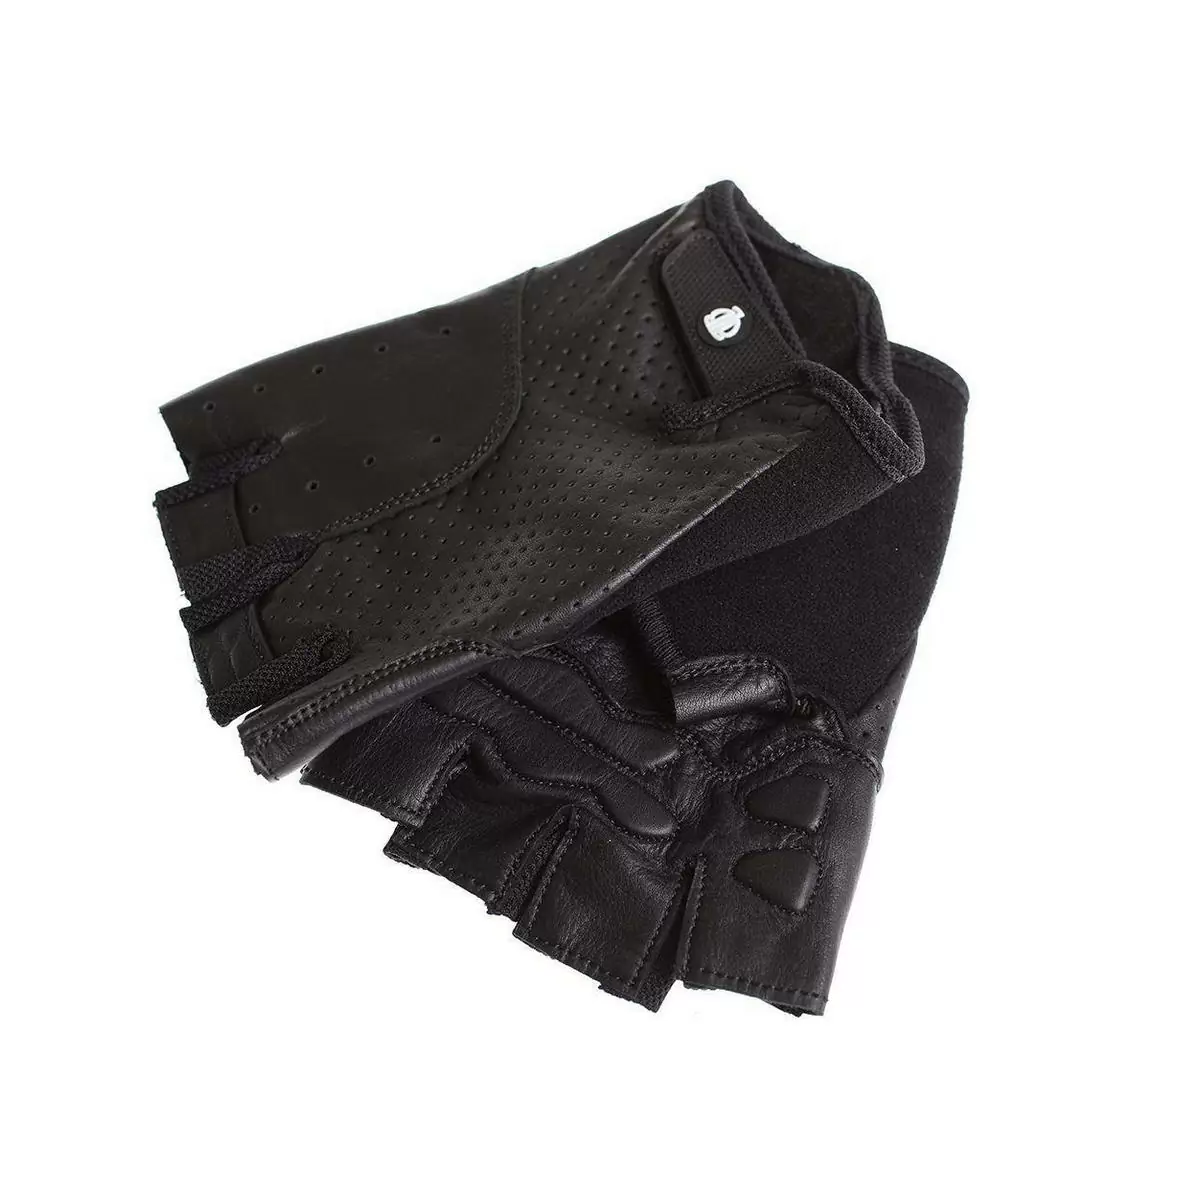 leather gloves classic sport size xxl black - image